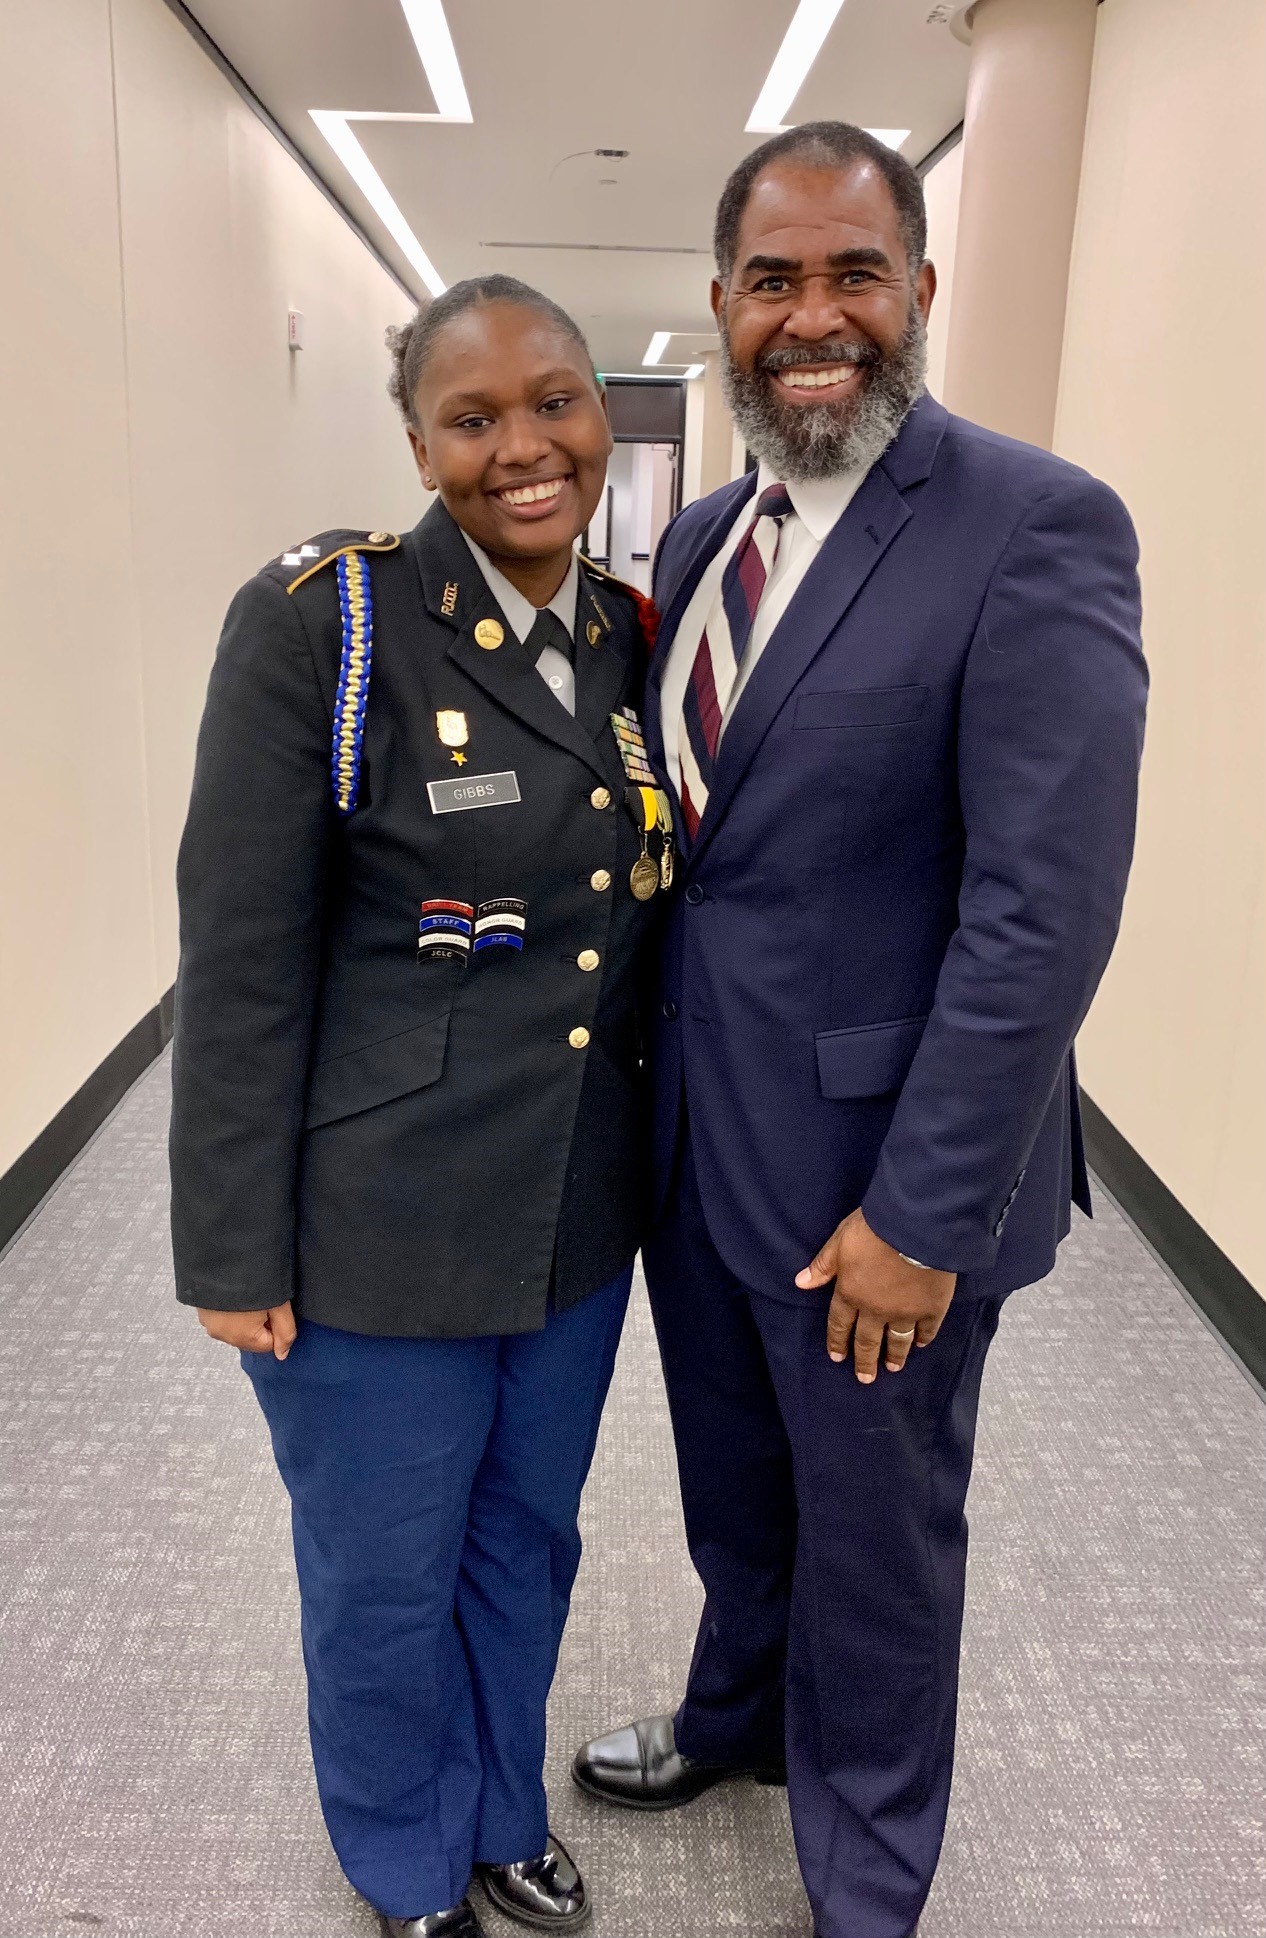 Cadet Lt. Col. Timberly Gibbs, Battalion Commander, Murphy JROTC greets Craig Collins, Alabama State, Education Administrator for CTE during activities for CTE on the Hill in Montgomery, AL.